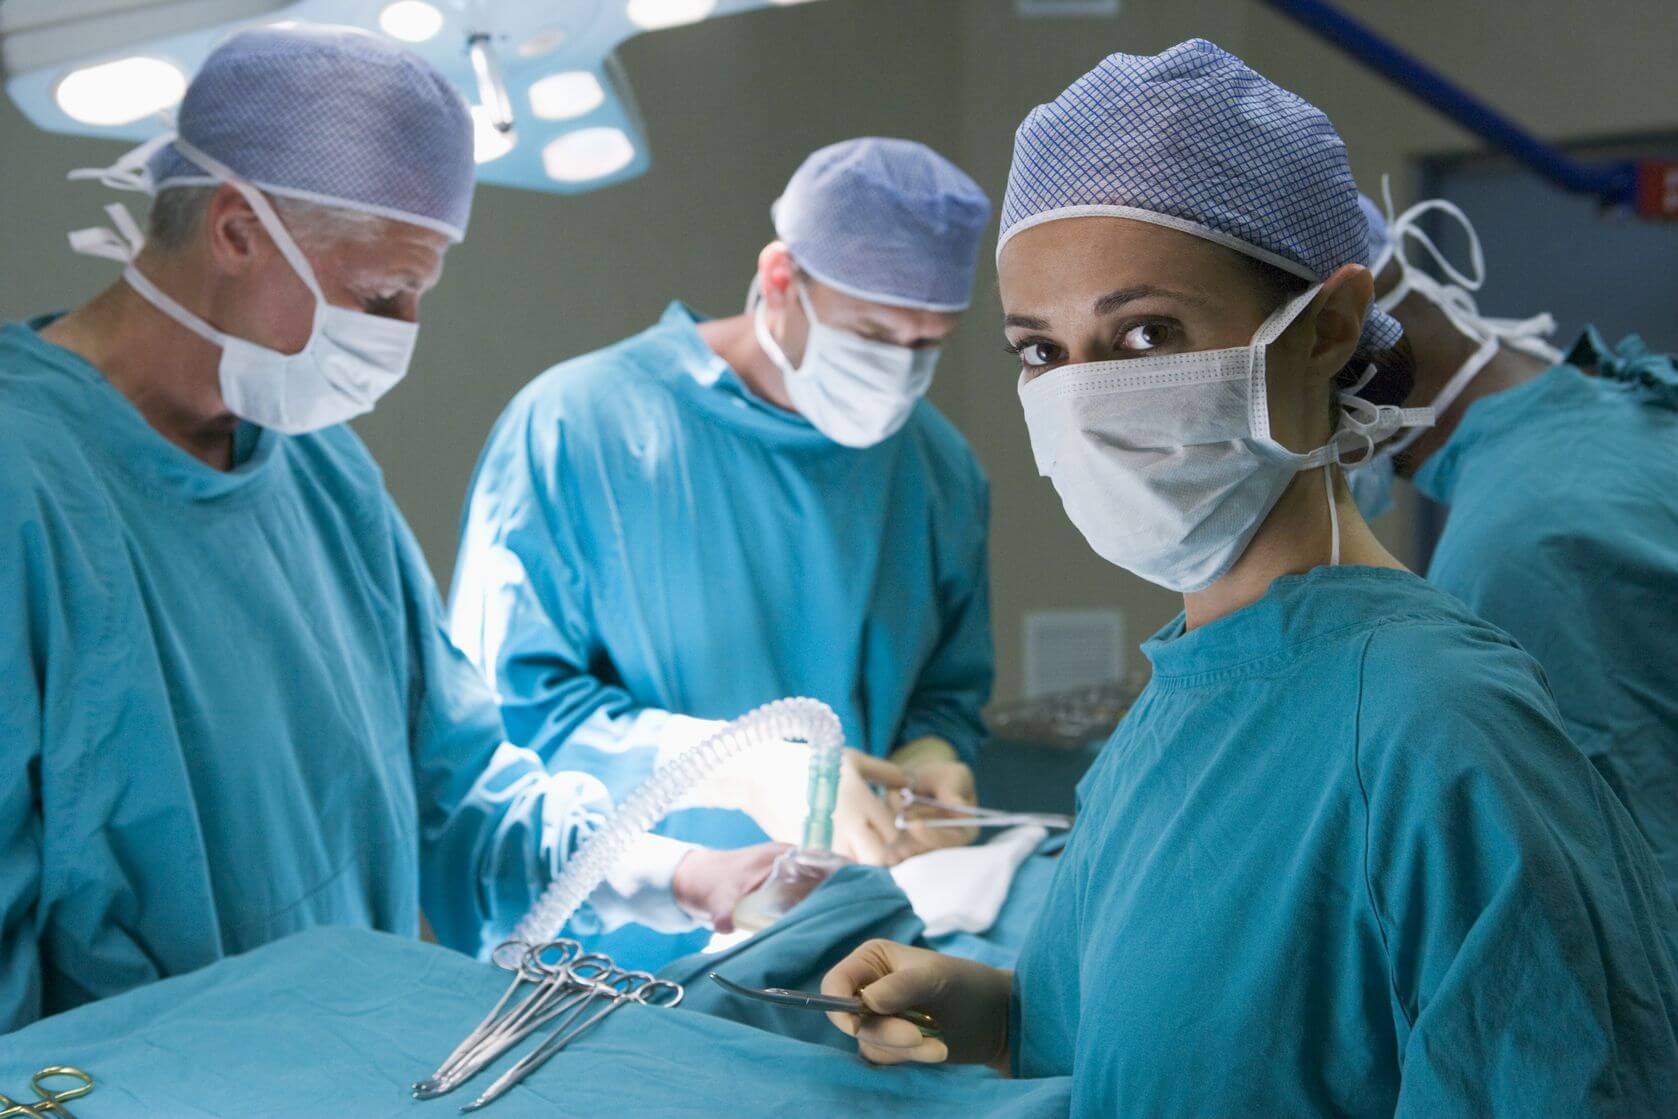 Surgeons Salary Higher Than Other Doctors Superpages